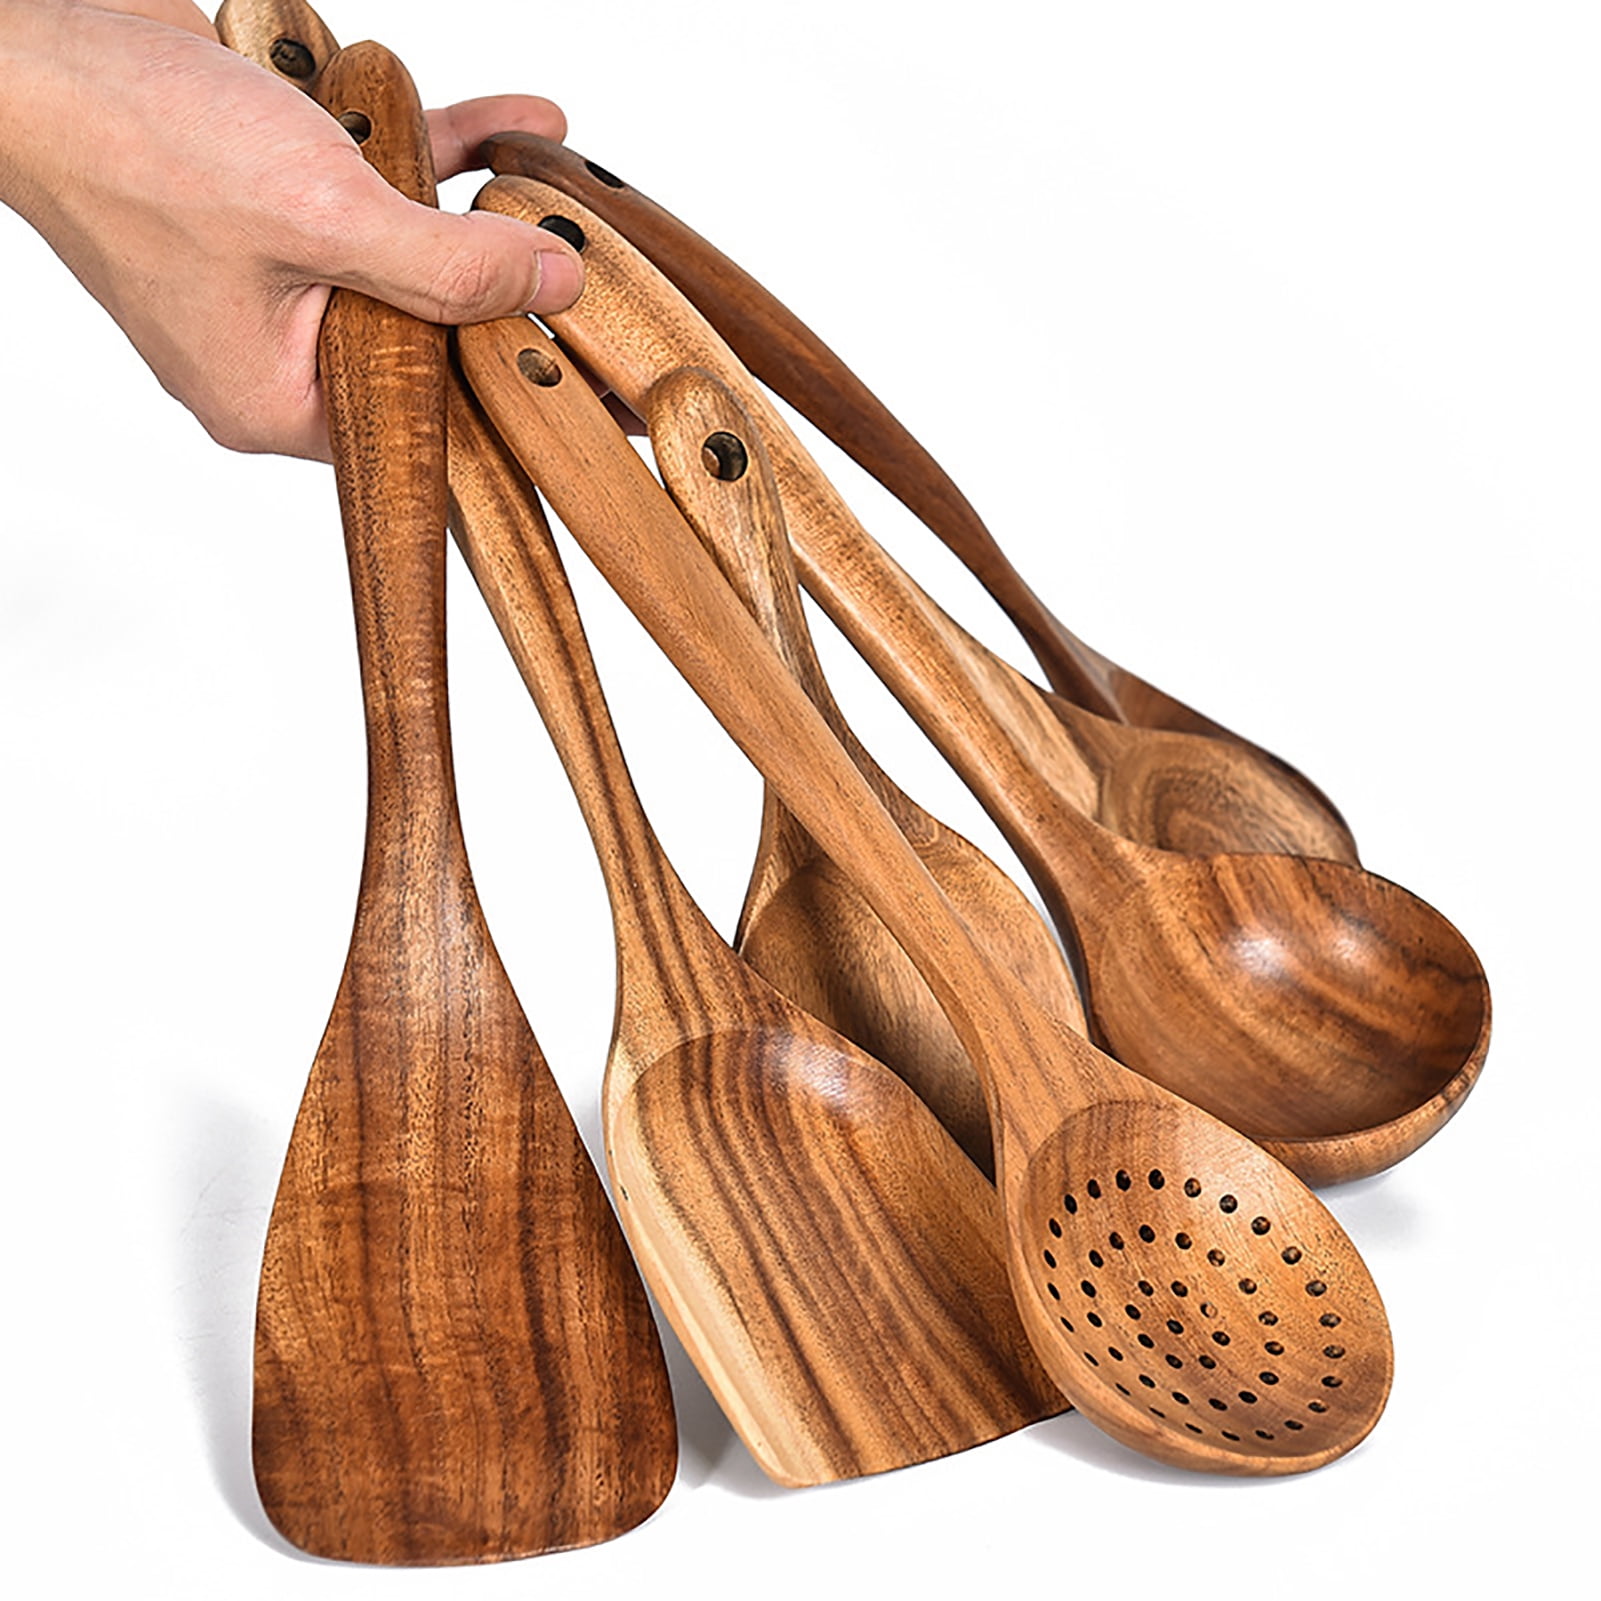 7-Piece Silicone and Bamboo Kitchen Utensils Set with Holder for Cooking,  Virtually Non-Stick, with Ladle, Slotted Turner, Slotted Spoon, Serving